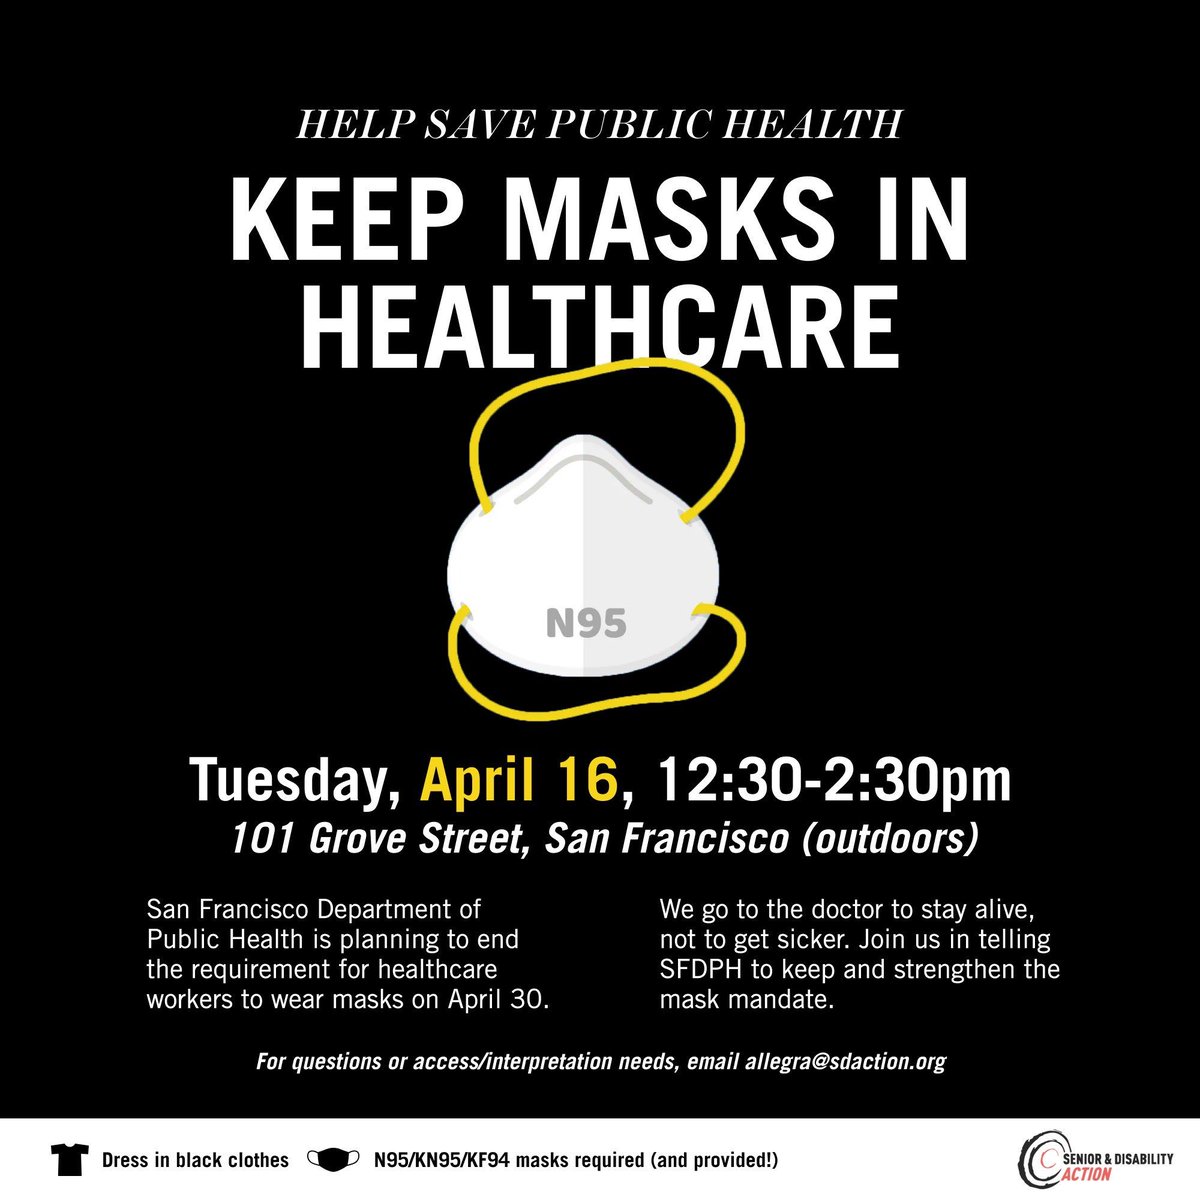 🚨 Bay Area — @SF_DPH will stop protecting patients in healthcare next month. Pls consider joining this action on 4/16 to protest. Mine & millions of lives were destroyed by an infection, & anyone pretending this policy will not result in more harm, has no place in healthcare.